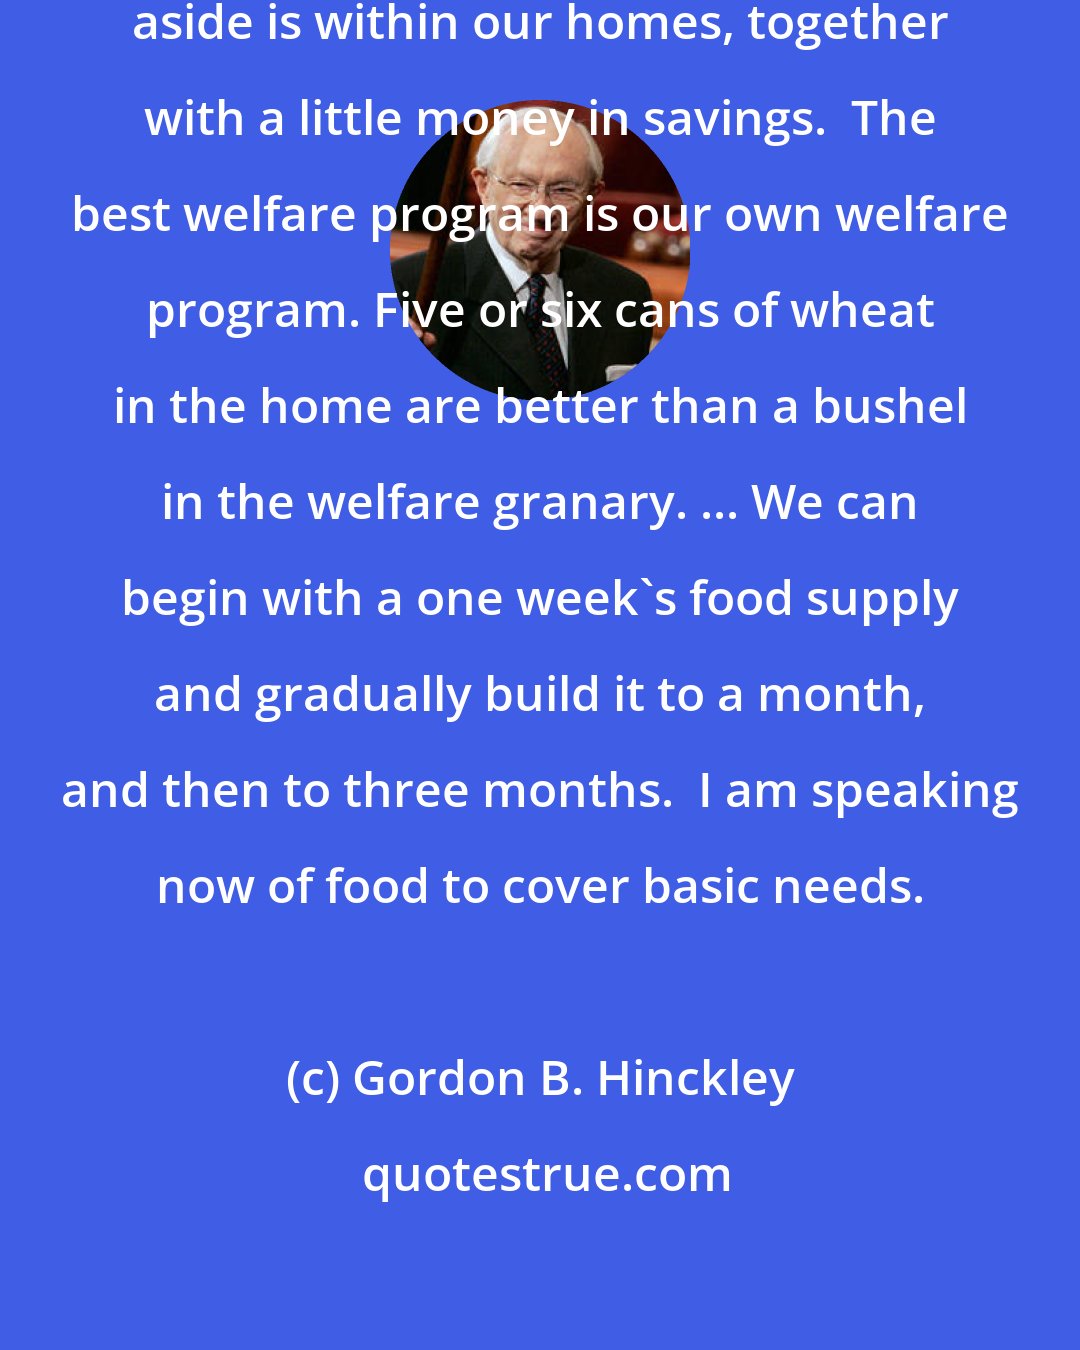 Gordon B. Hinckley: The best place to have some food set aside is within our homes, together with a little money in savings.  The best welfare program is our own welfare program. Five or six cans of wheat in the home are better than a bushel in the welfare granary. ... We can begin with a one week's food supply and gradually build it to a month, and then to three months.  I am speaking now of food to cover basic needs.